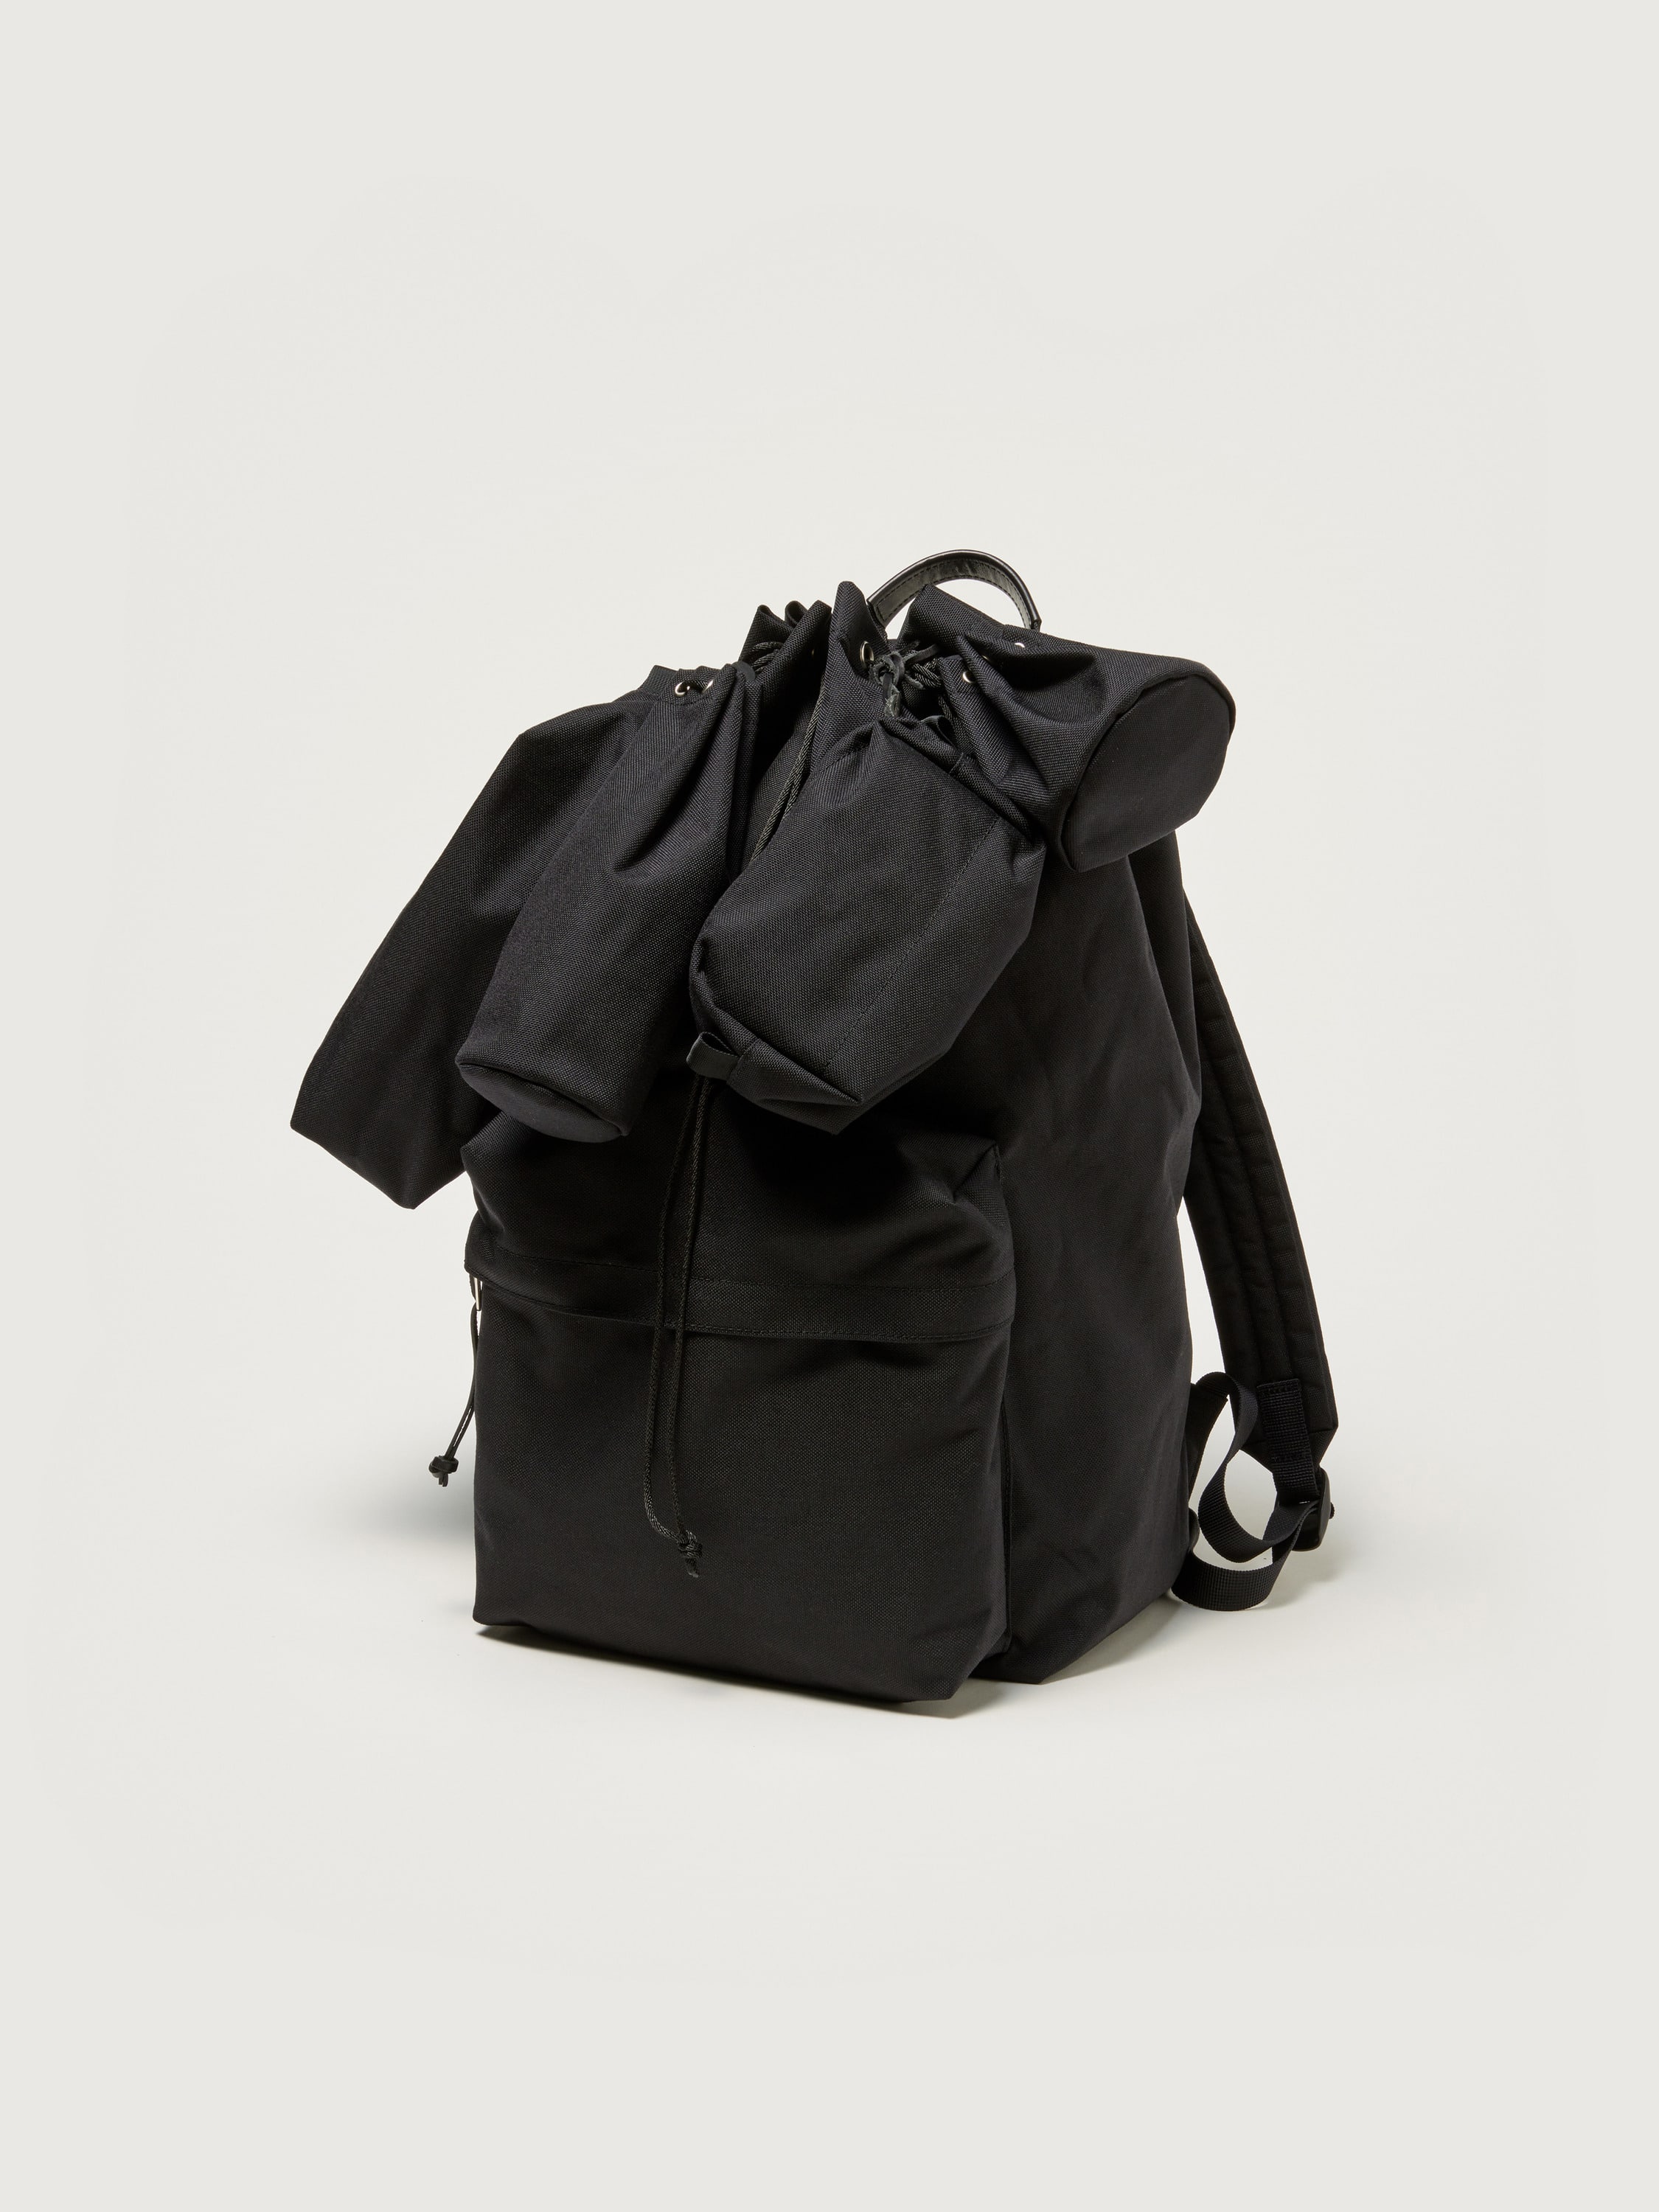 LARGE BACKPACK SET MADE BY AETA 詳細画像 BLACK 2